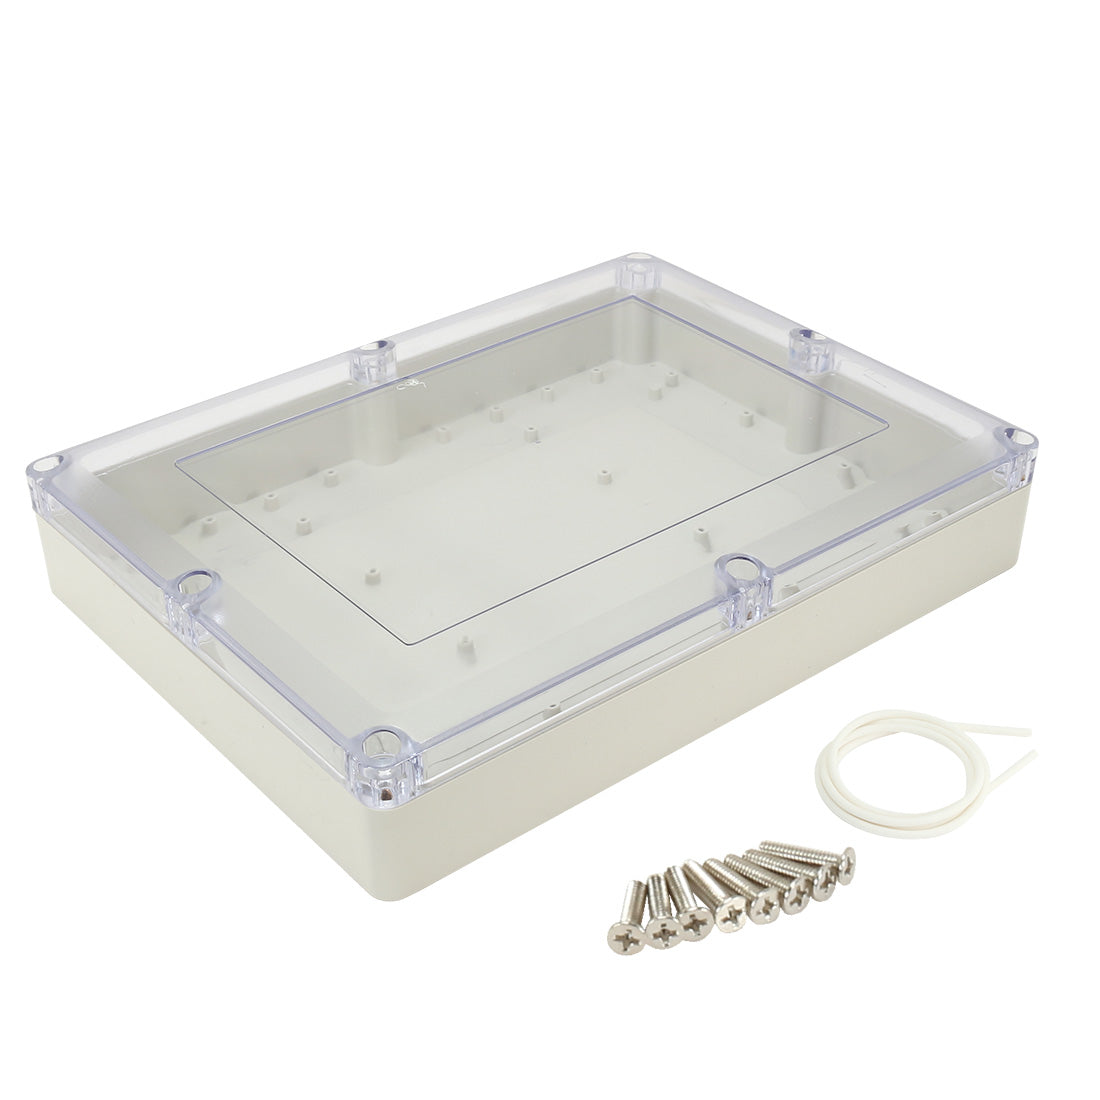 uxcell Uxcell 12.6"x9.5"x2.3"(320mmx240mmx60mm) ABS Junction Box Universal Project Enclosure w PC Transparent Cover